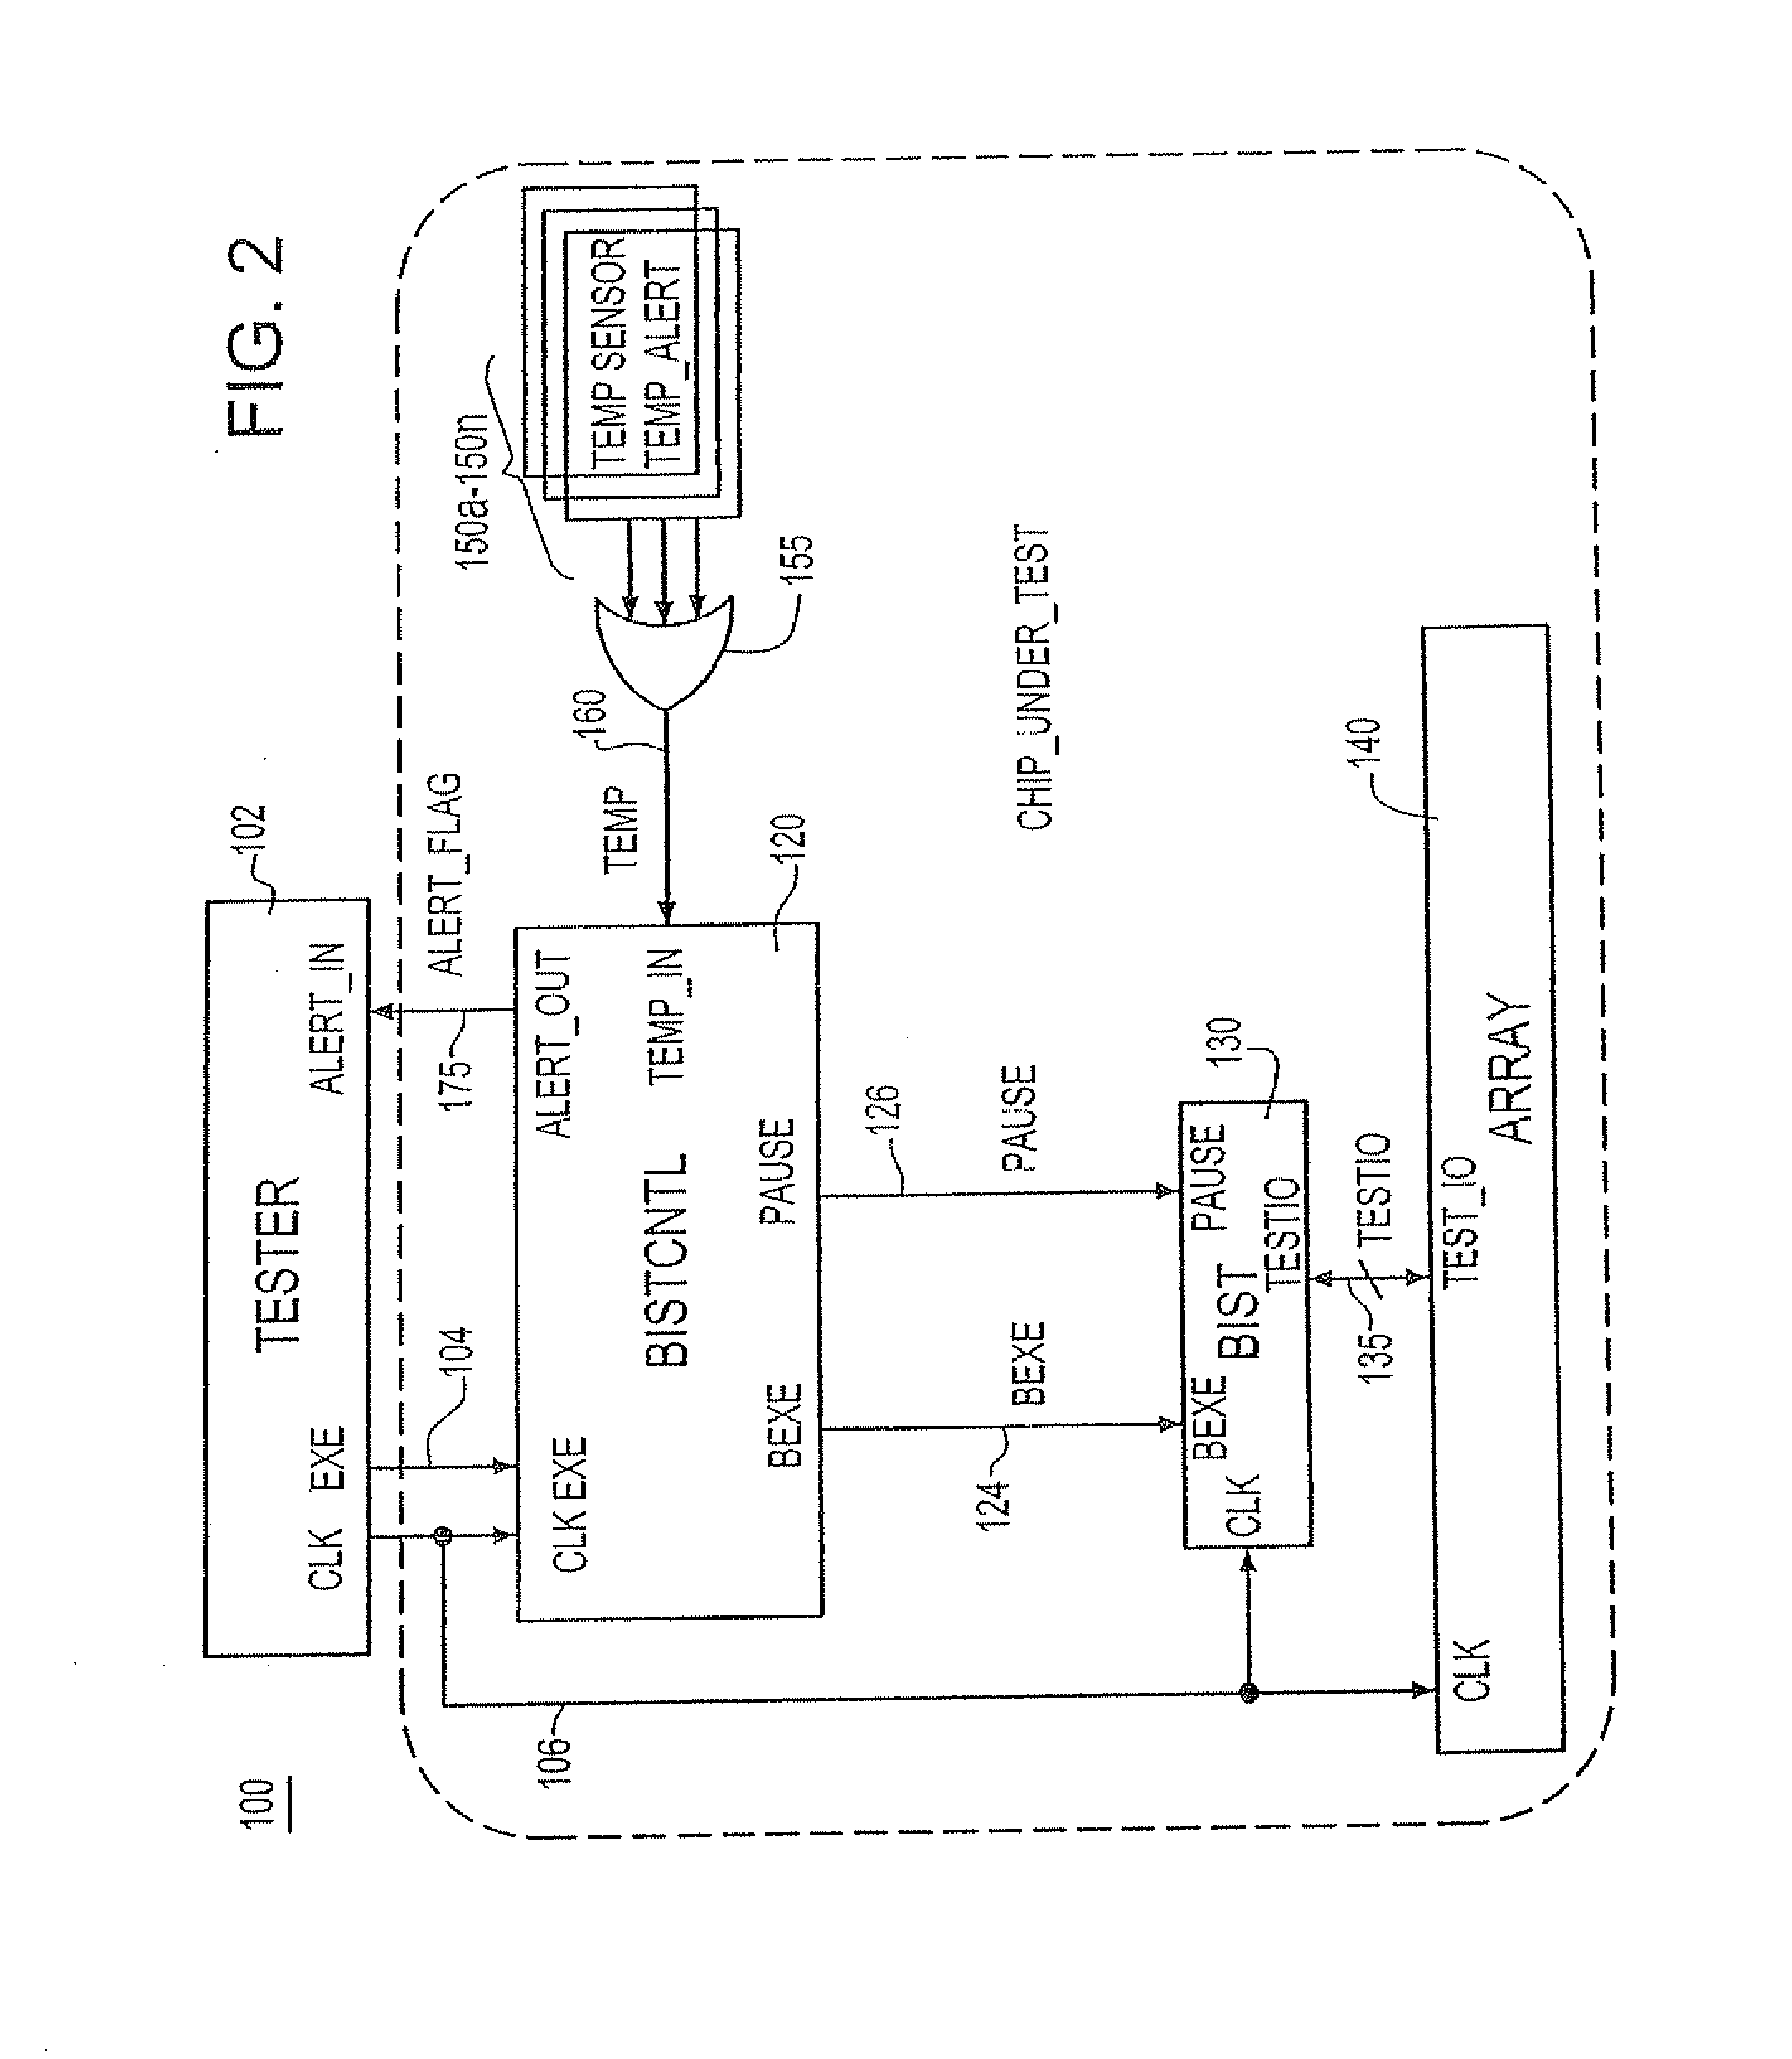 Automatic shutdown or throttling of a bist state machine using thermal feedback